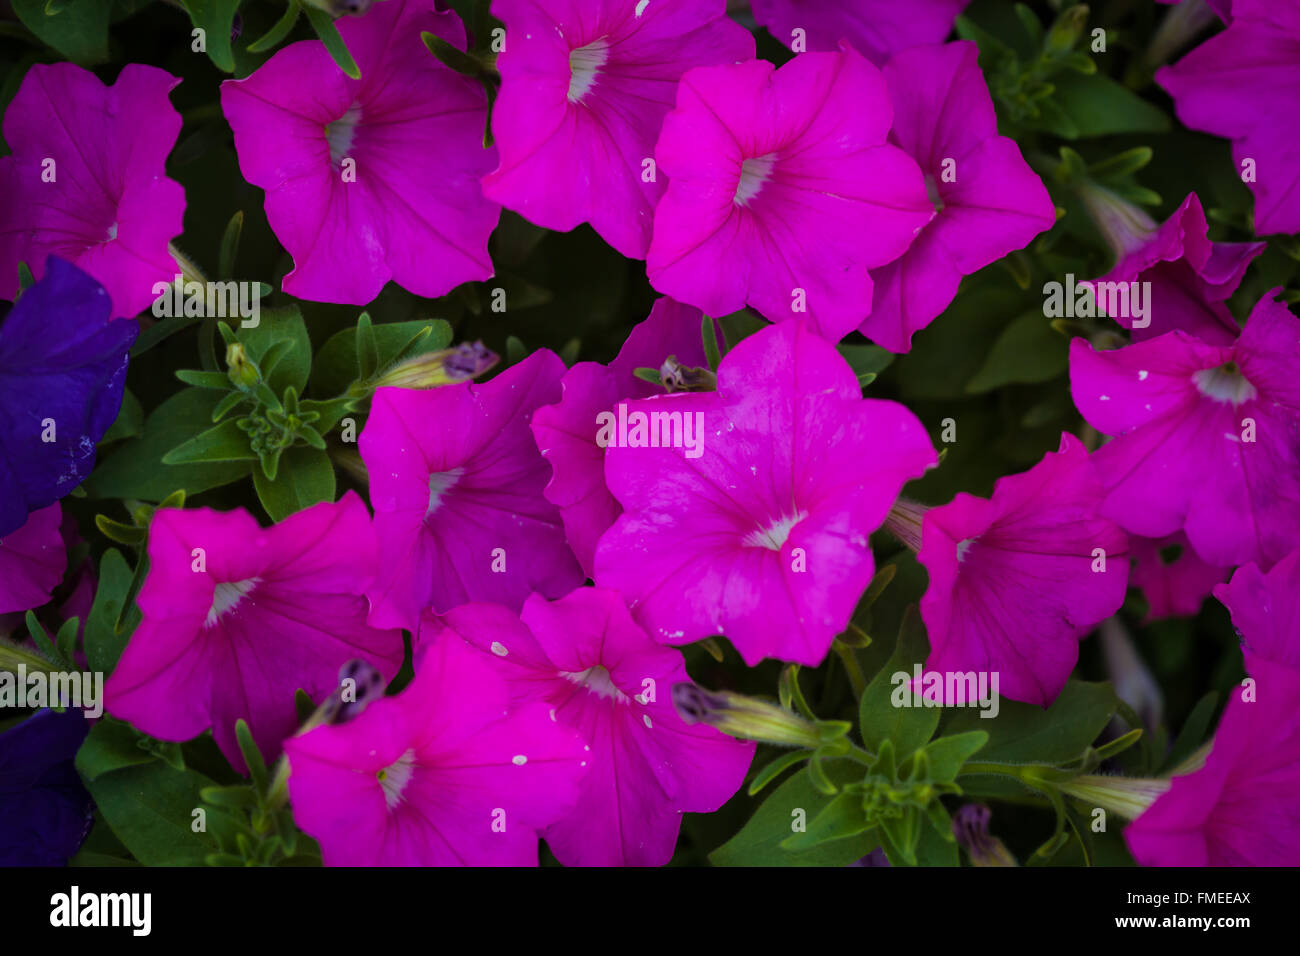 A large group of brightly pink, purple, or magenta colored flowers. Stock Photo